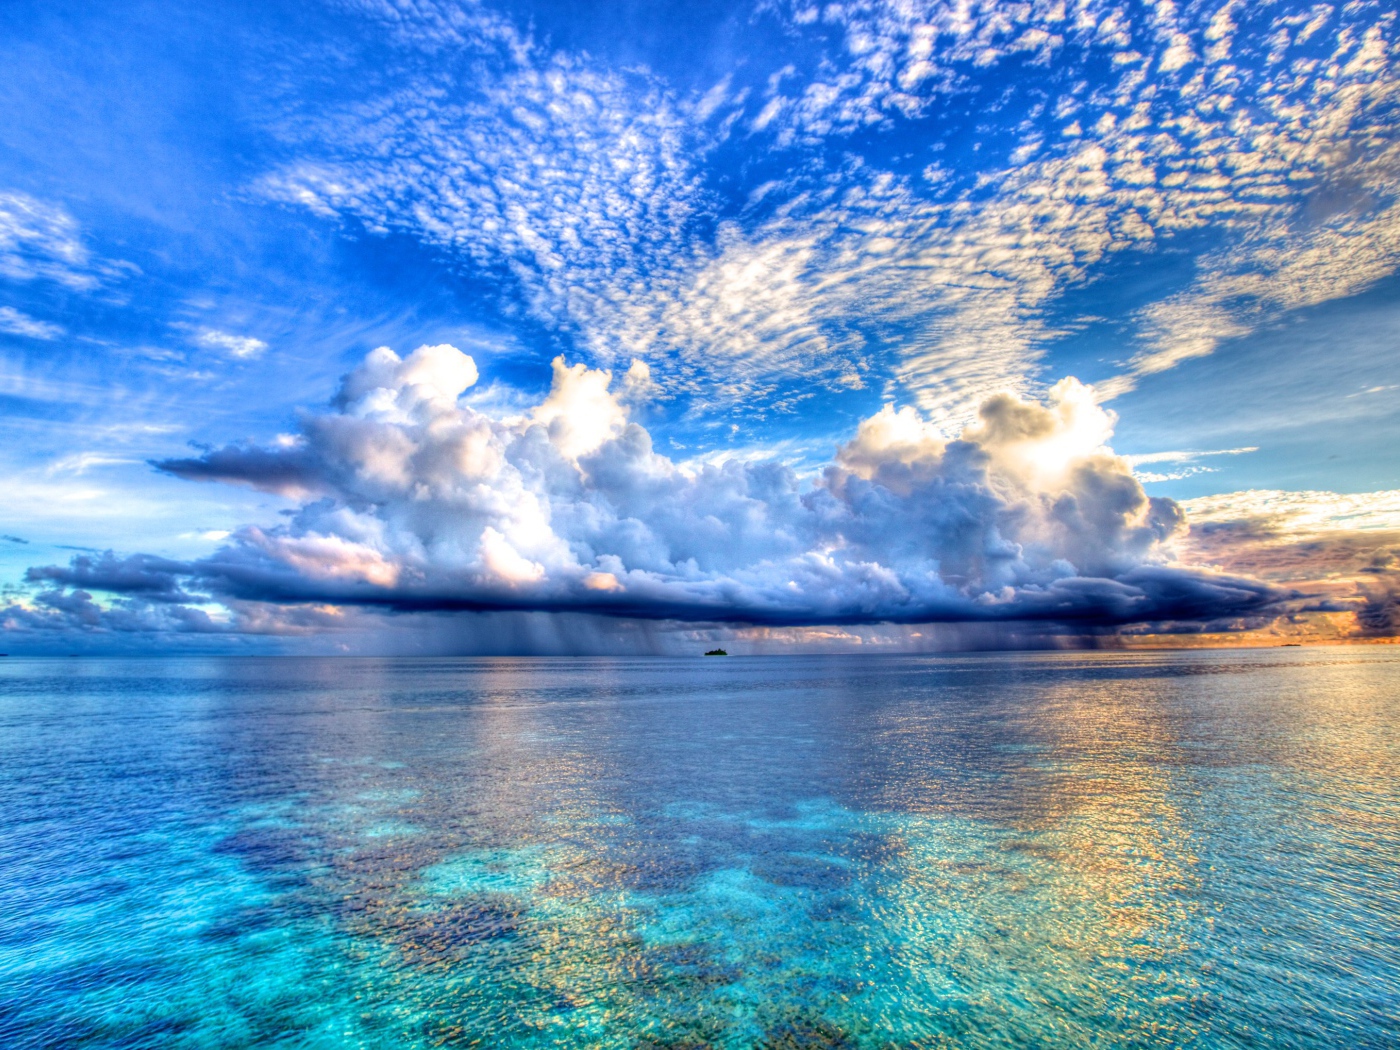 Beautiful clouds reflected in the blue water of the ocean